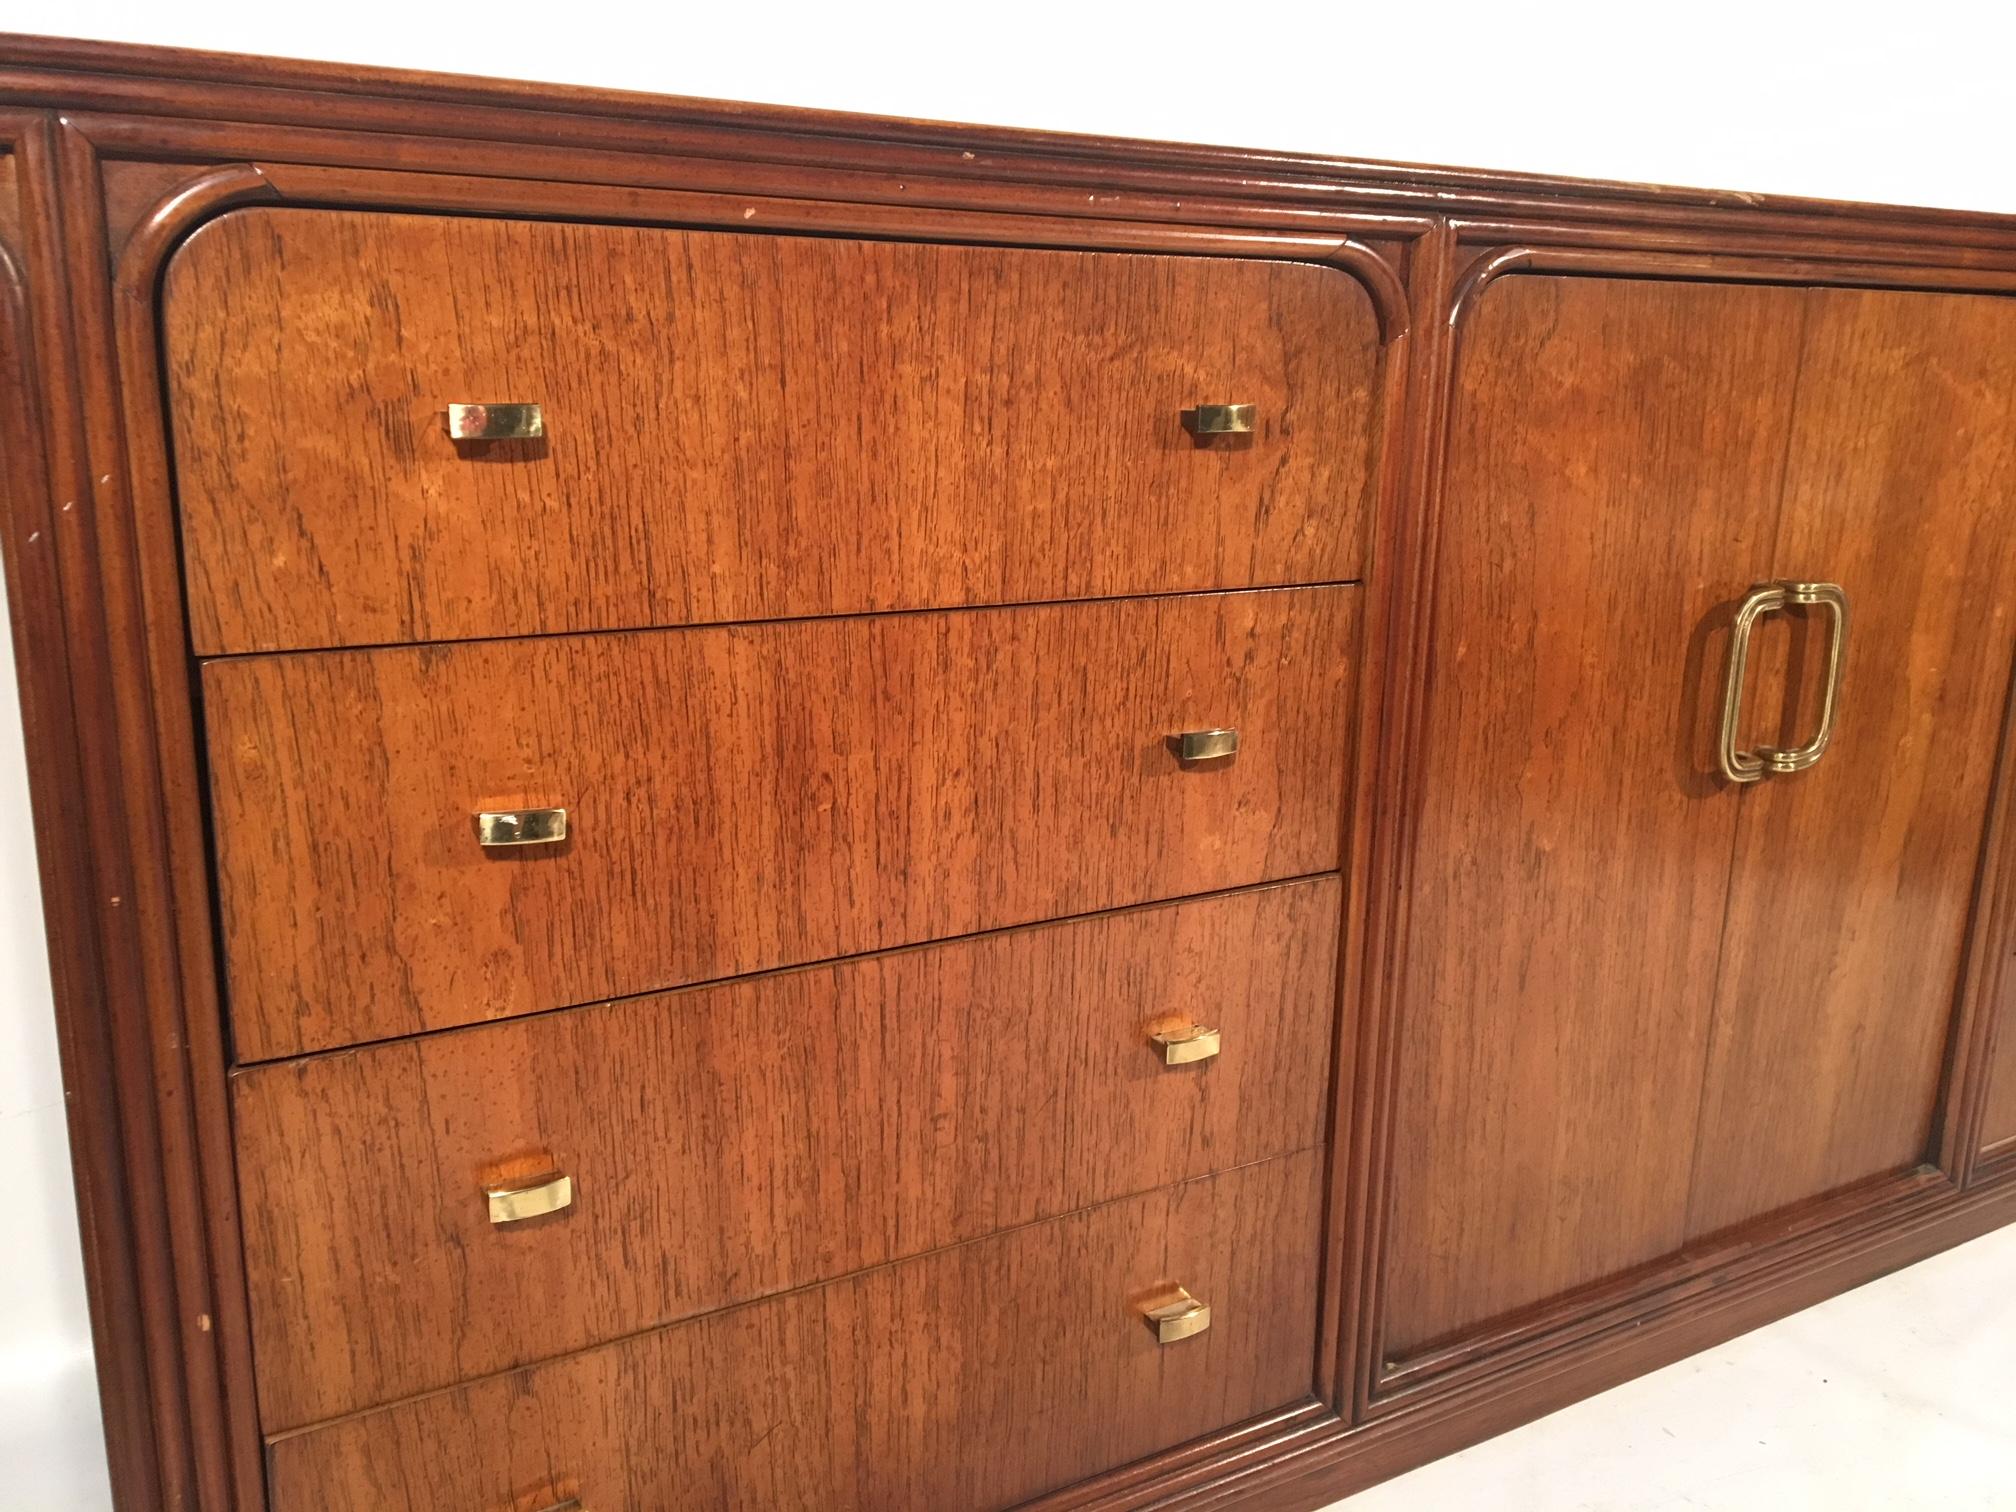 Vintage 12-drawer dresser by Century Furniture features art deco style detailing and brass hardware. Extremely heavy, solid construction. Good vintage condition with small abrasions to top surface (see photos).